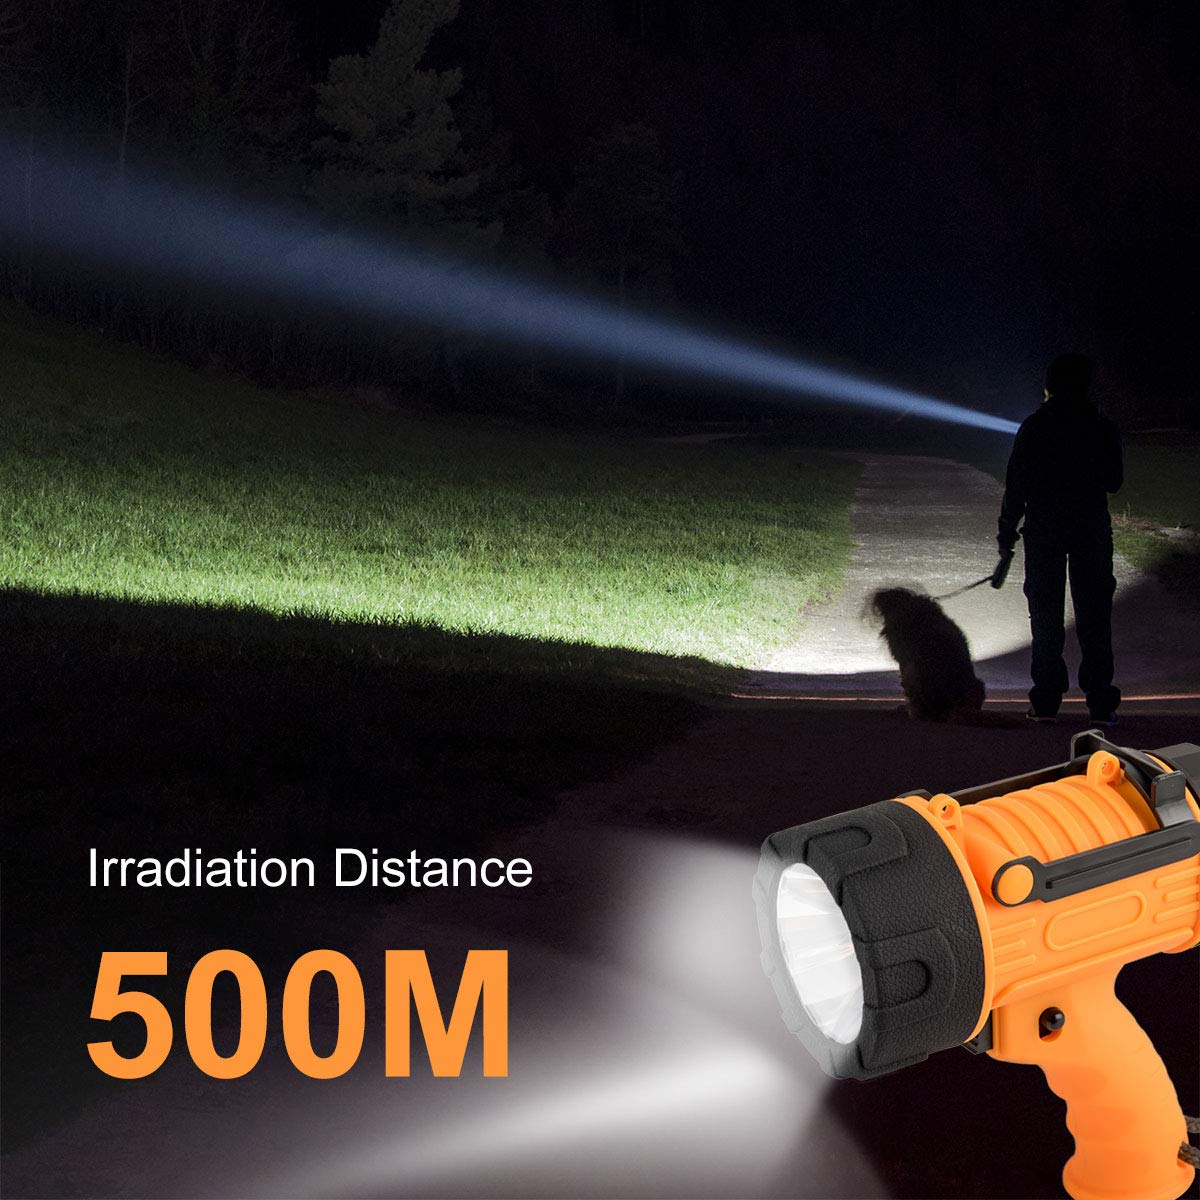 YIERBLUE Rechargeable Spotlight,Handheld Rechargeable Spotlight 18W Waterproof Flashlight, Super Bright 100000 Lumens LED,10000mAh 20h Ultra-Long Standby,Ideal Spotlight for Boating, Camping…